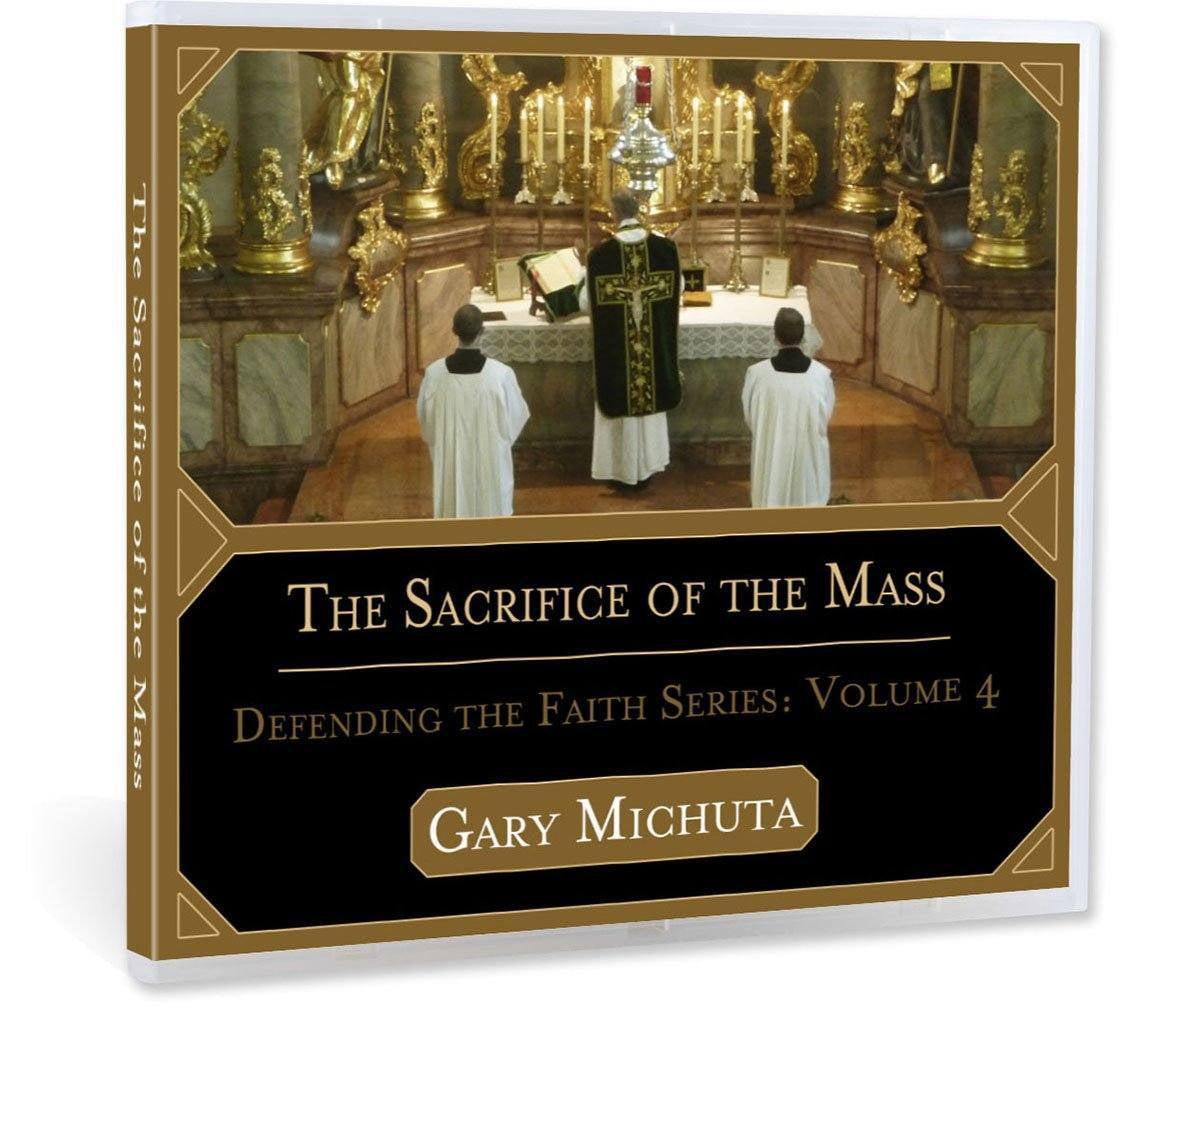 Gary Michuta discusses what sacrifice even means in a Biblical world view, how the mass can be a sacrifice, and whether or not Jesus calls us to unite our sacrifices to his crucifixion (CD).